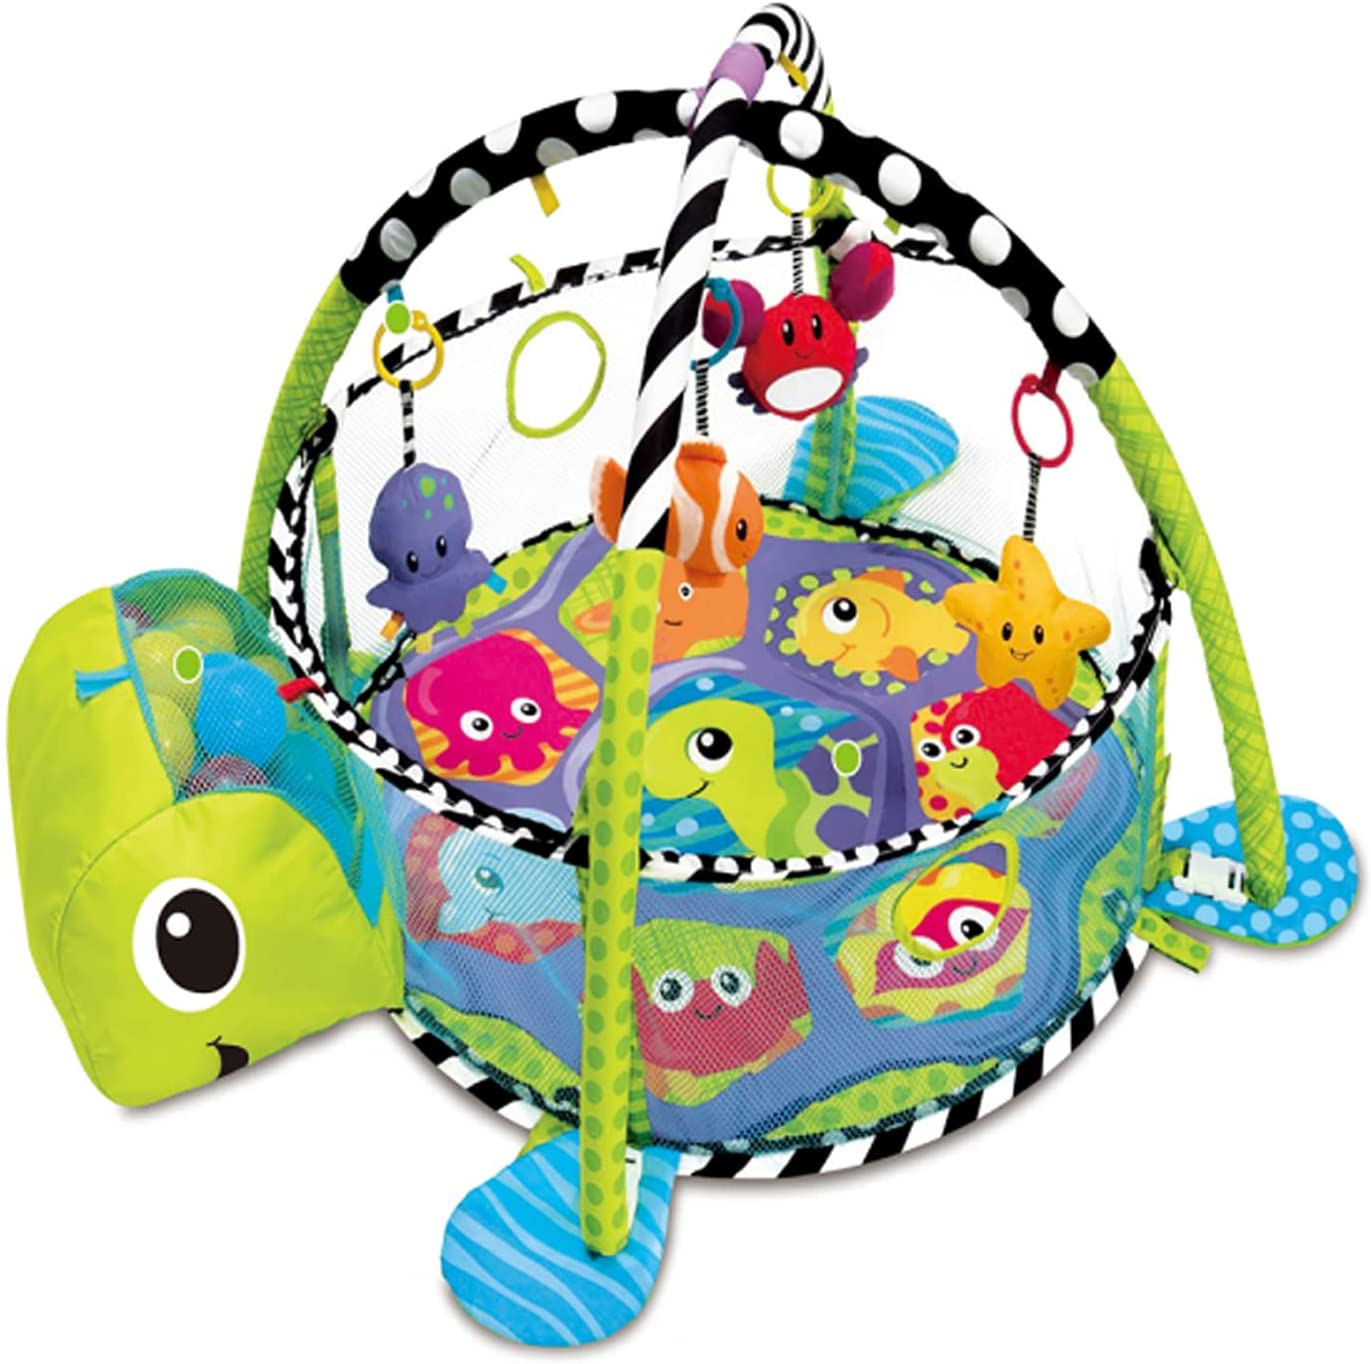 Turtle Baby Gym 3 in 1 Activity Play Floor Mat 30 Coloured Balls &Babies Playmat 